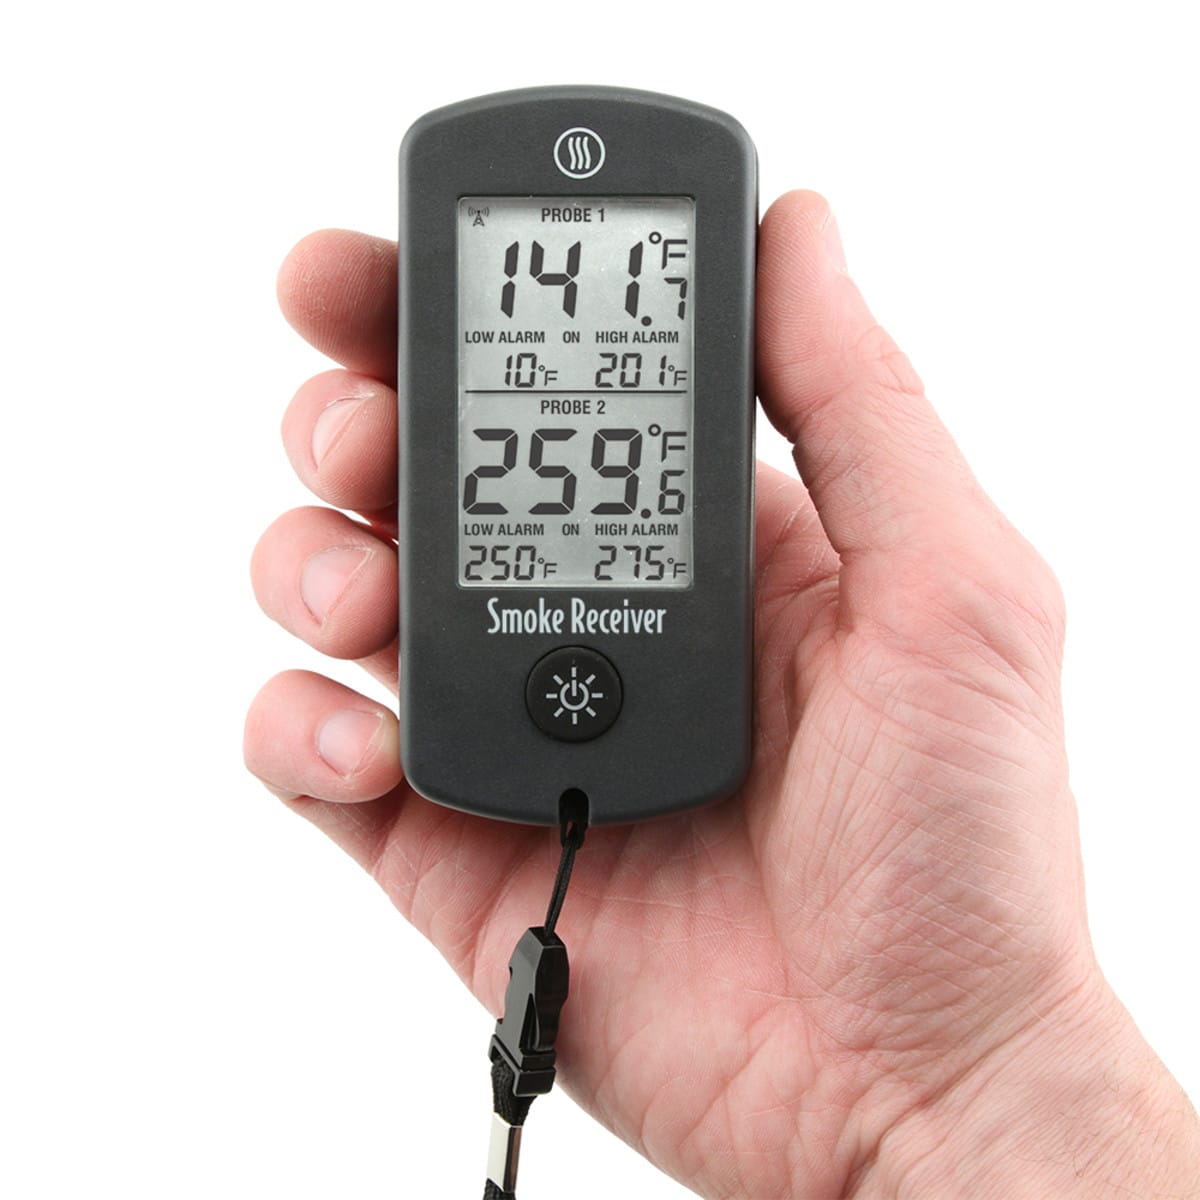 ThermoWorks DOT Thermometer Review - BarbequeLovers.com